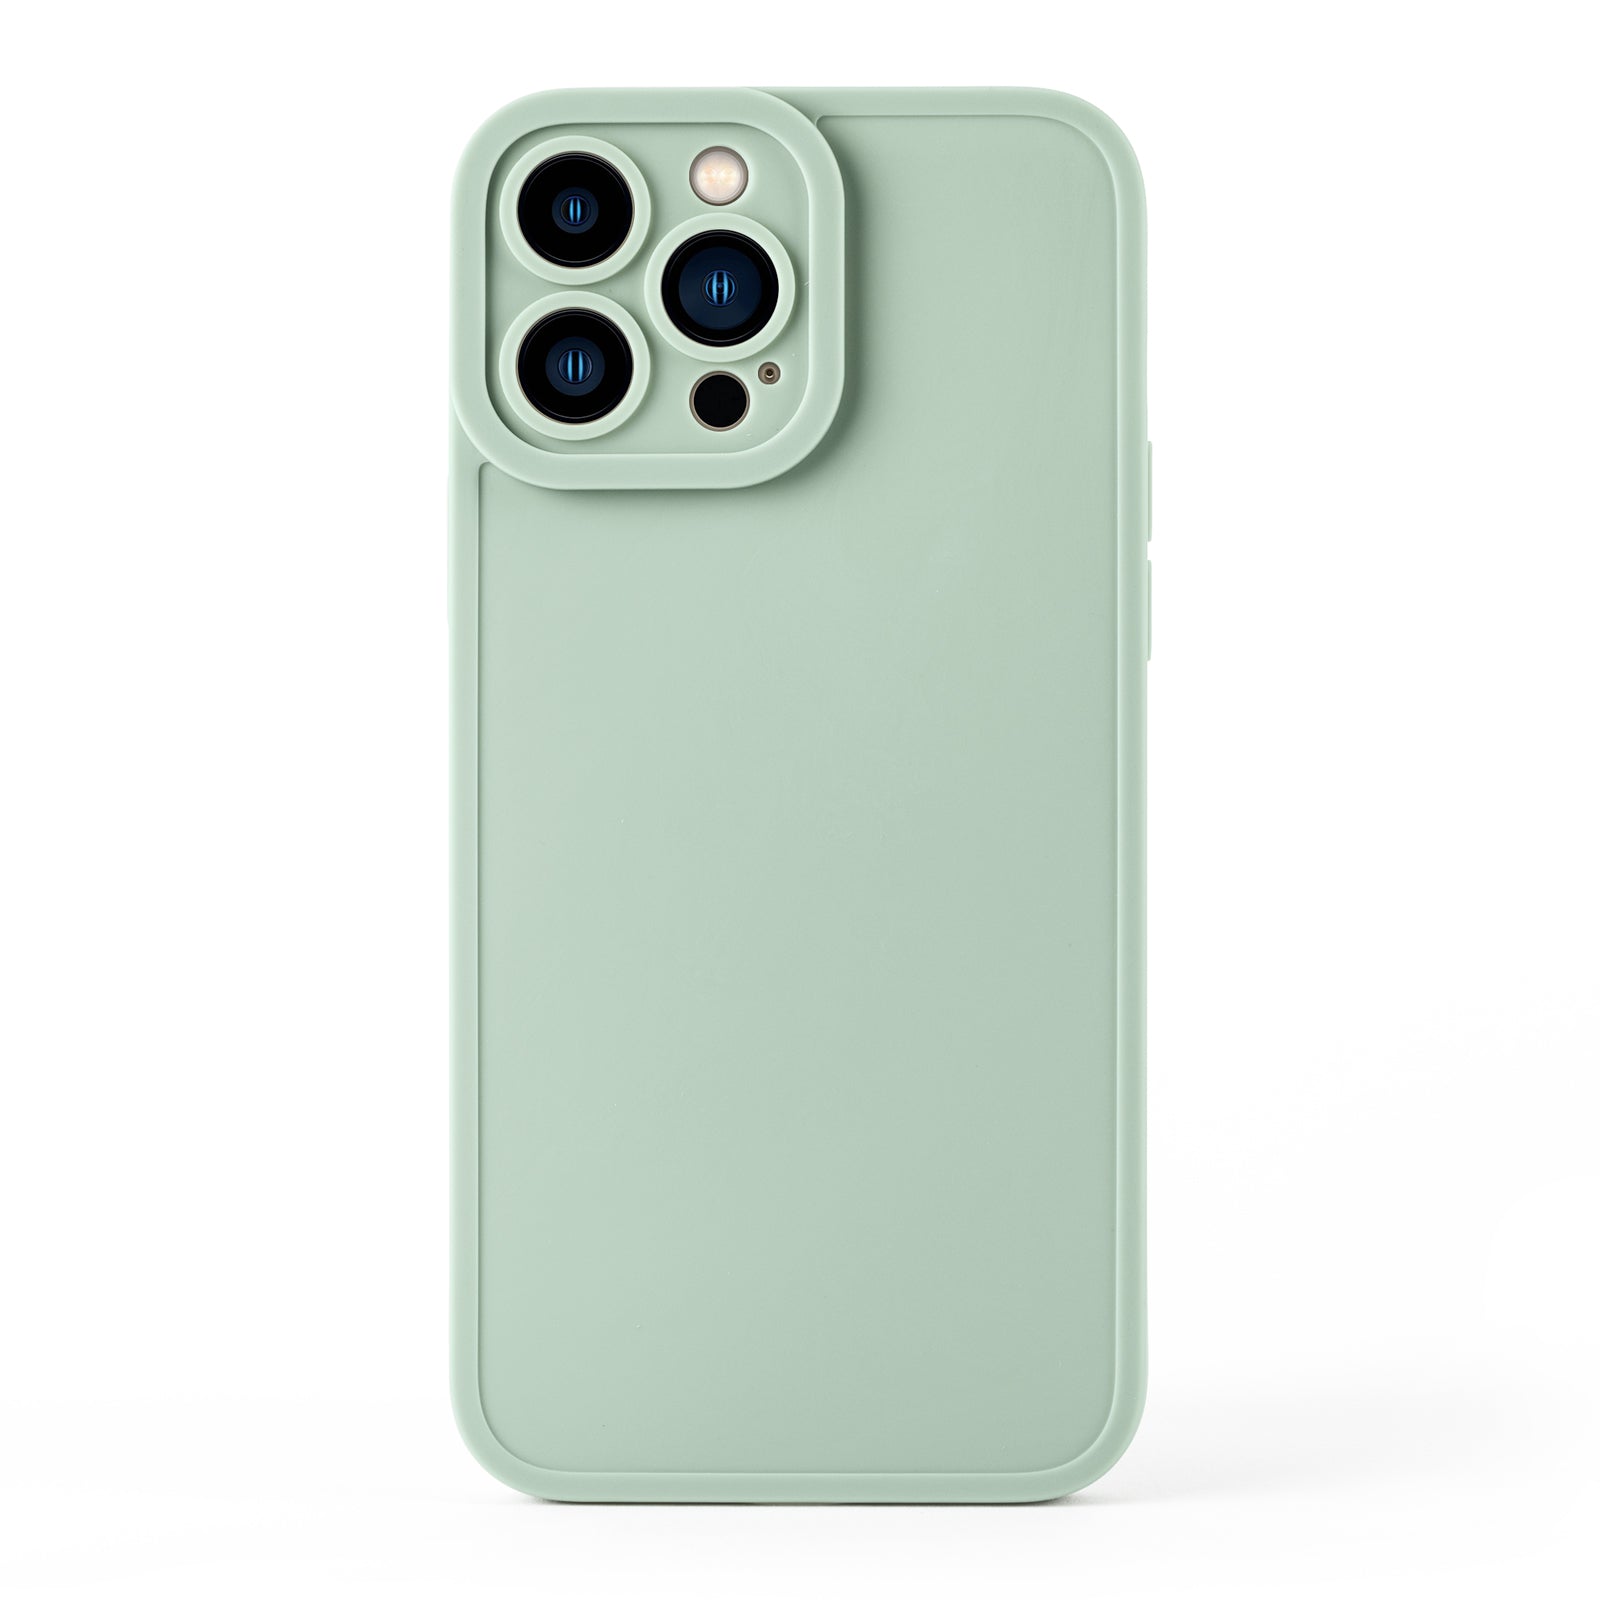 Silicone iPhone Case - Mint Green